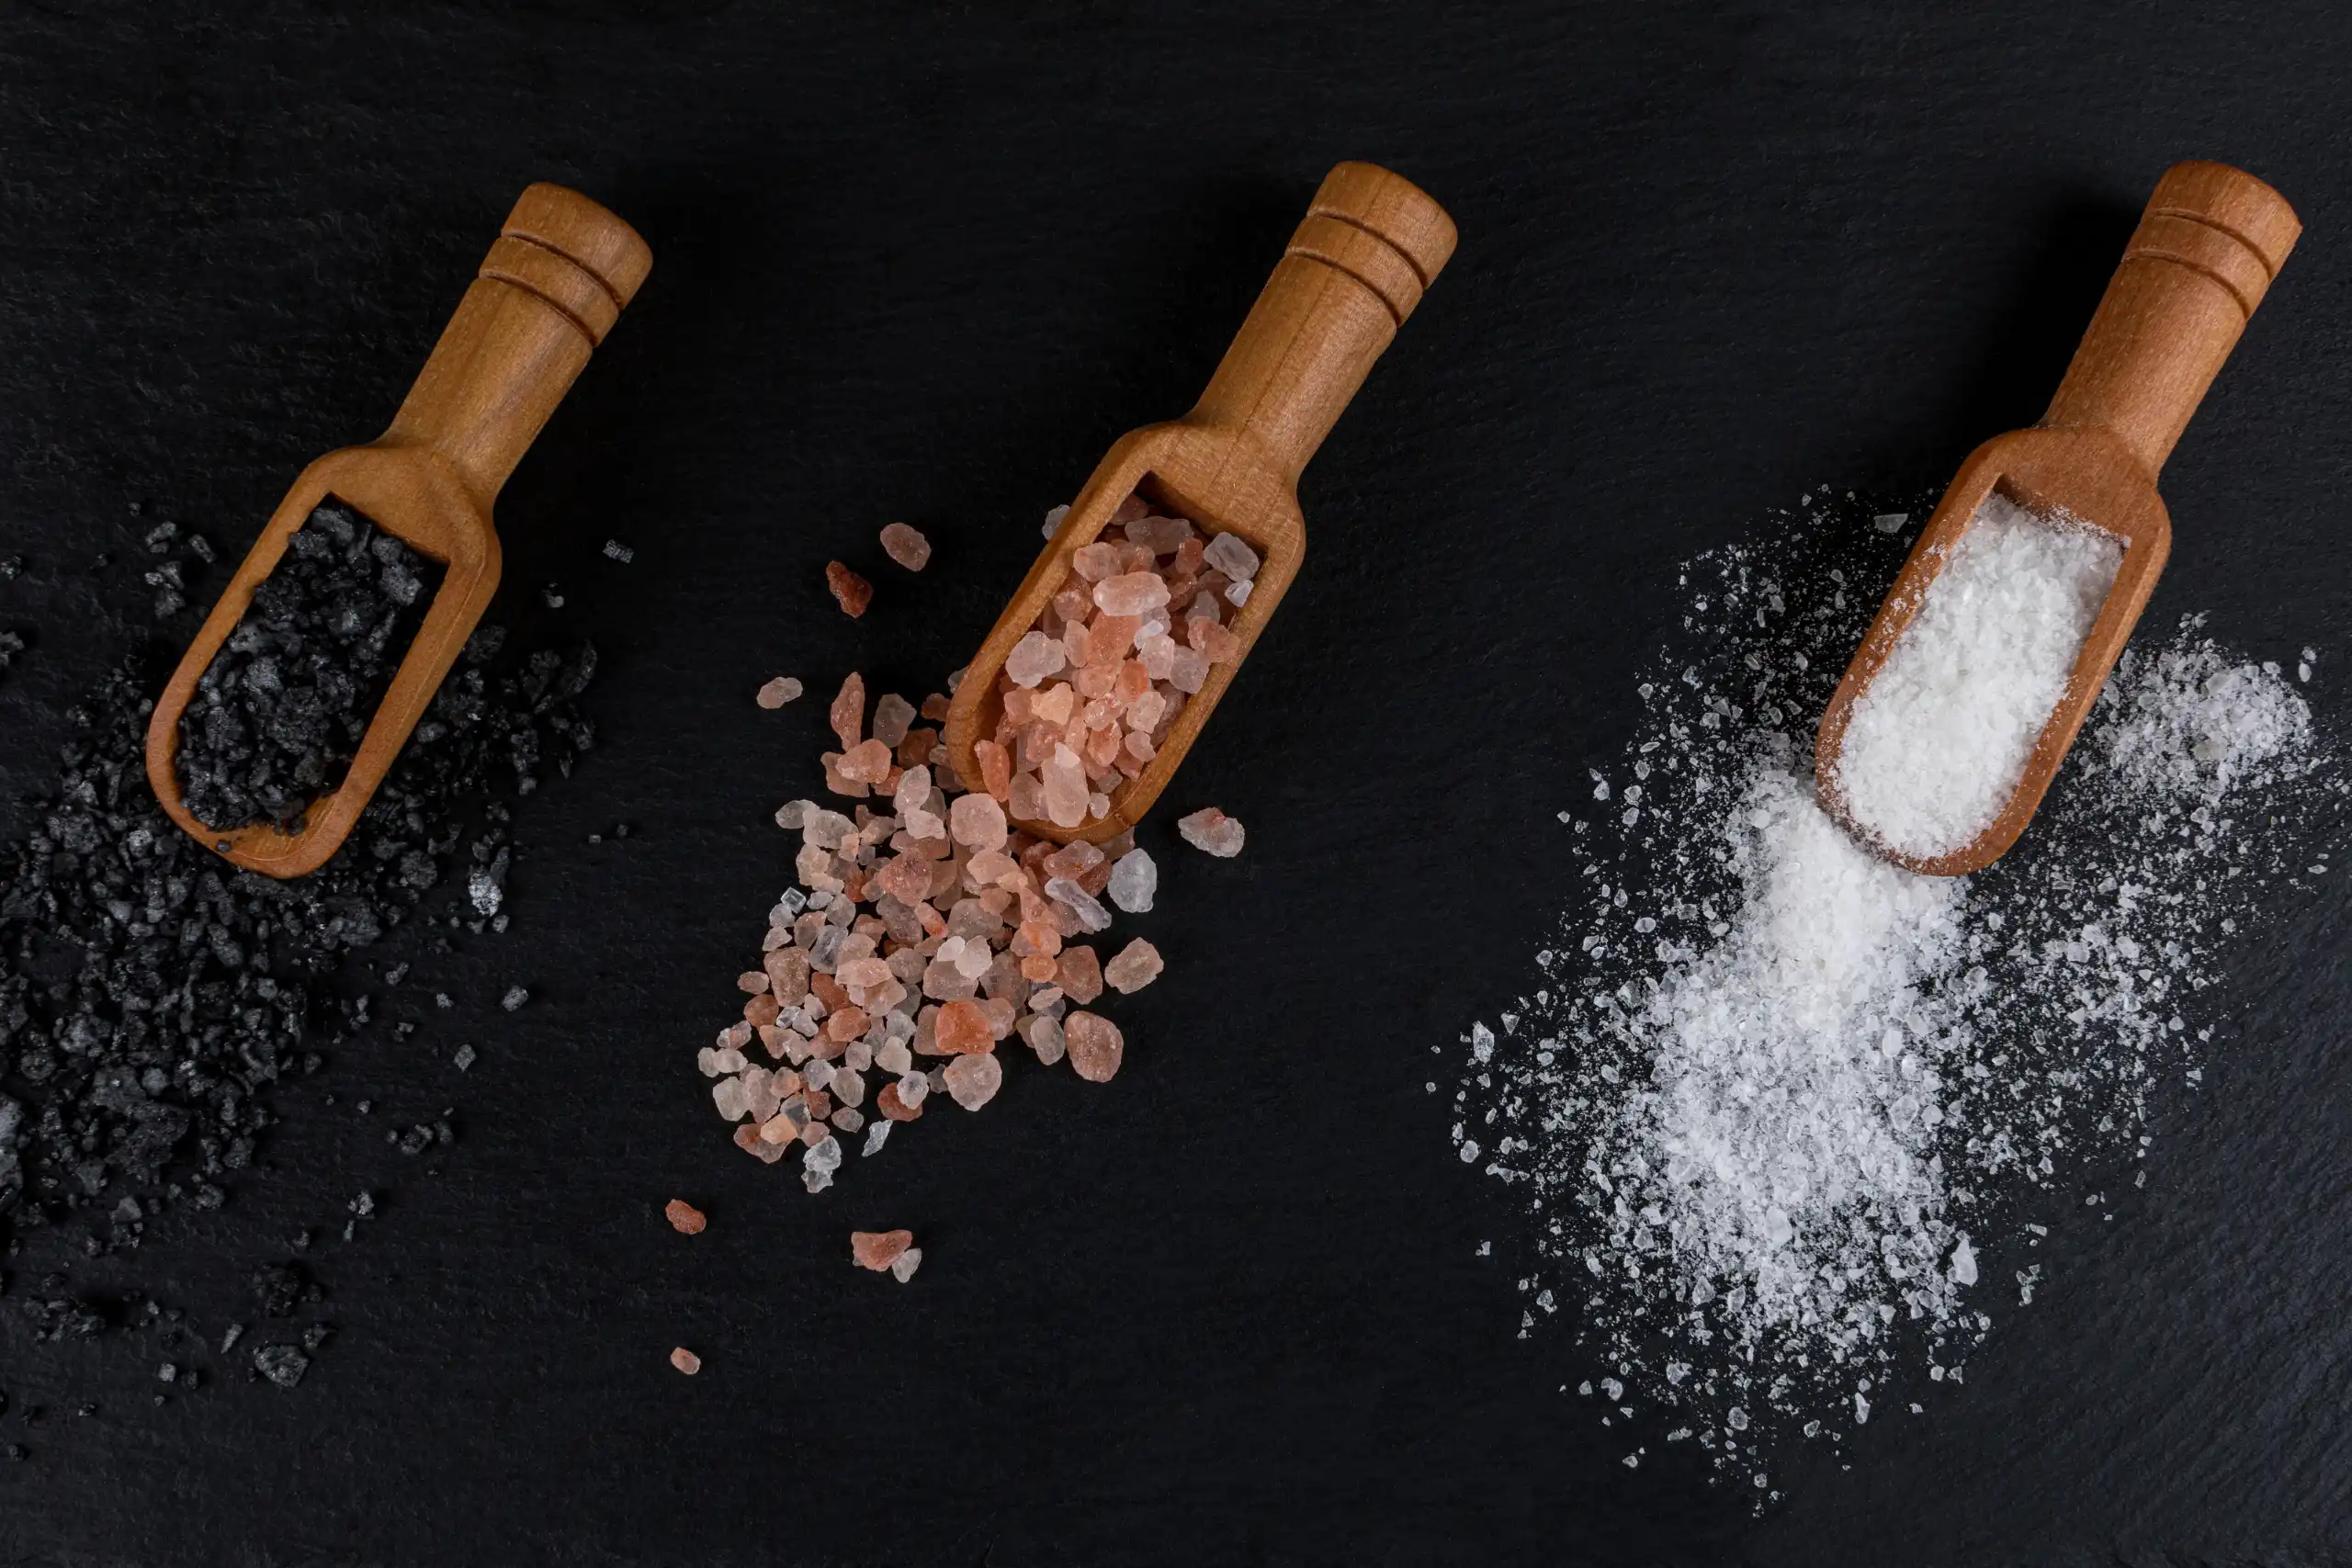 Close-up photo of three wooden spoons filled with different colored Himalayan salt: pink, white, and black.